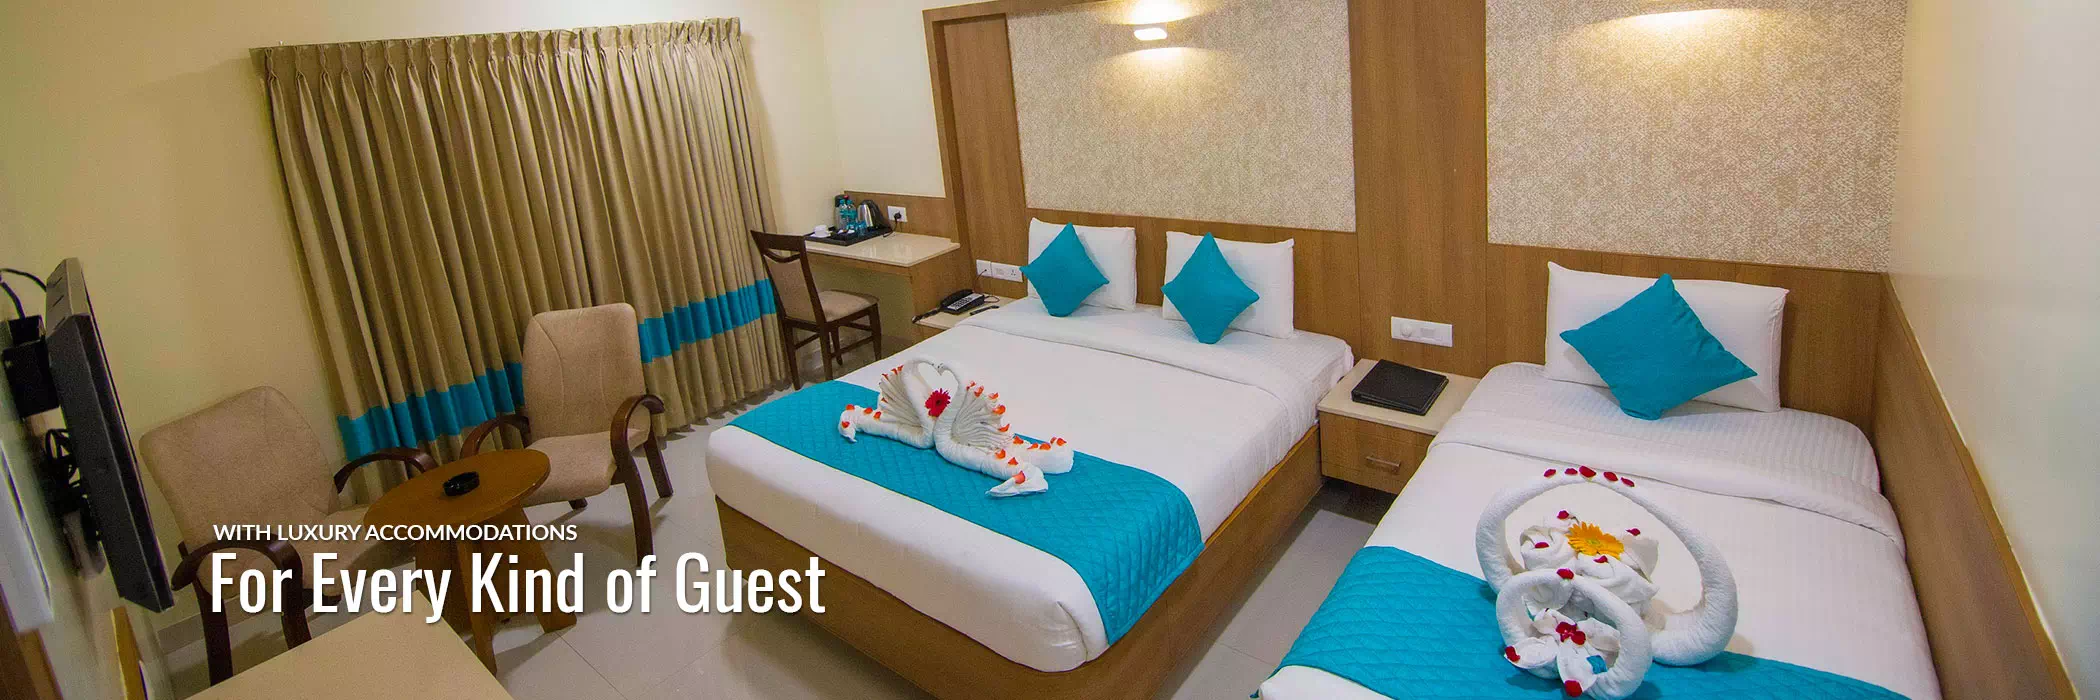 3 star hotels in coimbatore